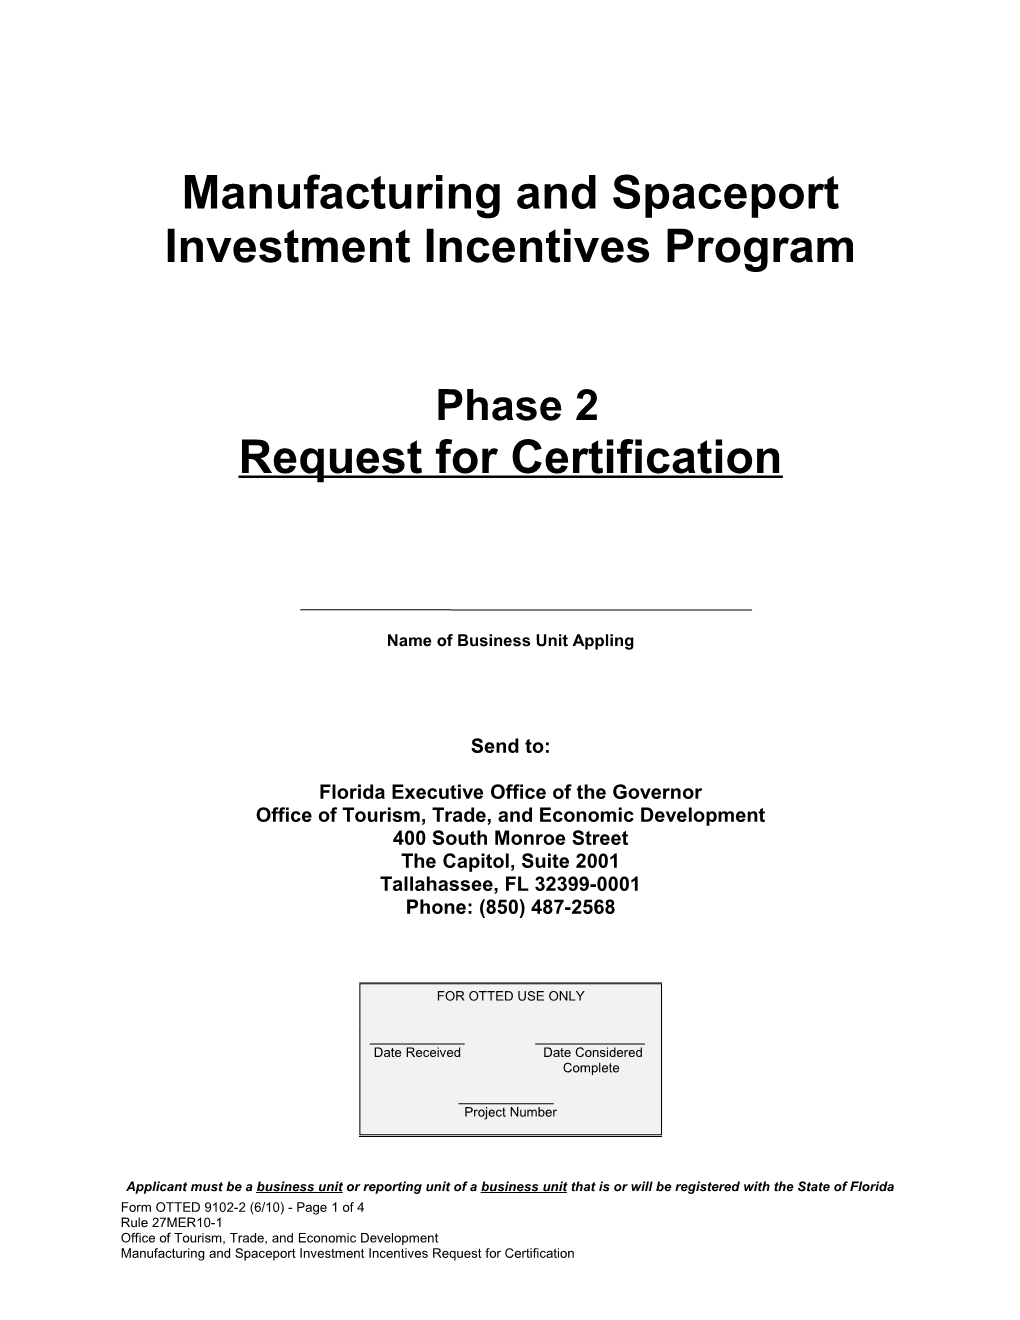 Manufacturing and Spaceport Investment